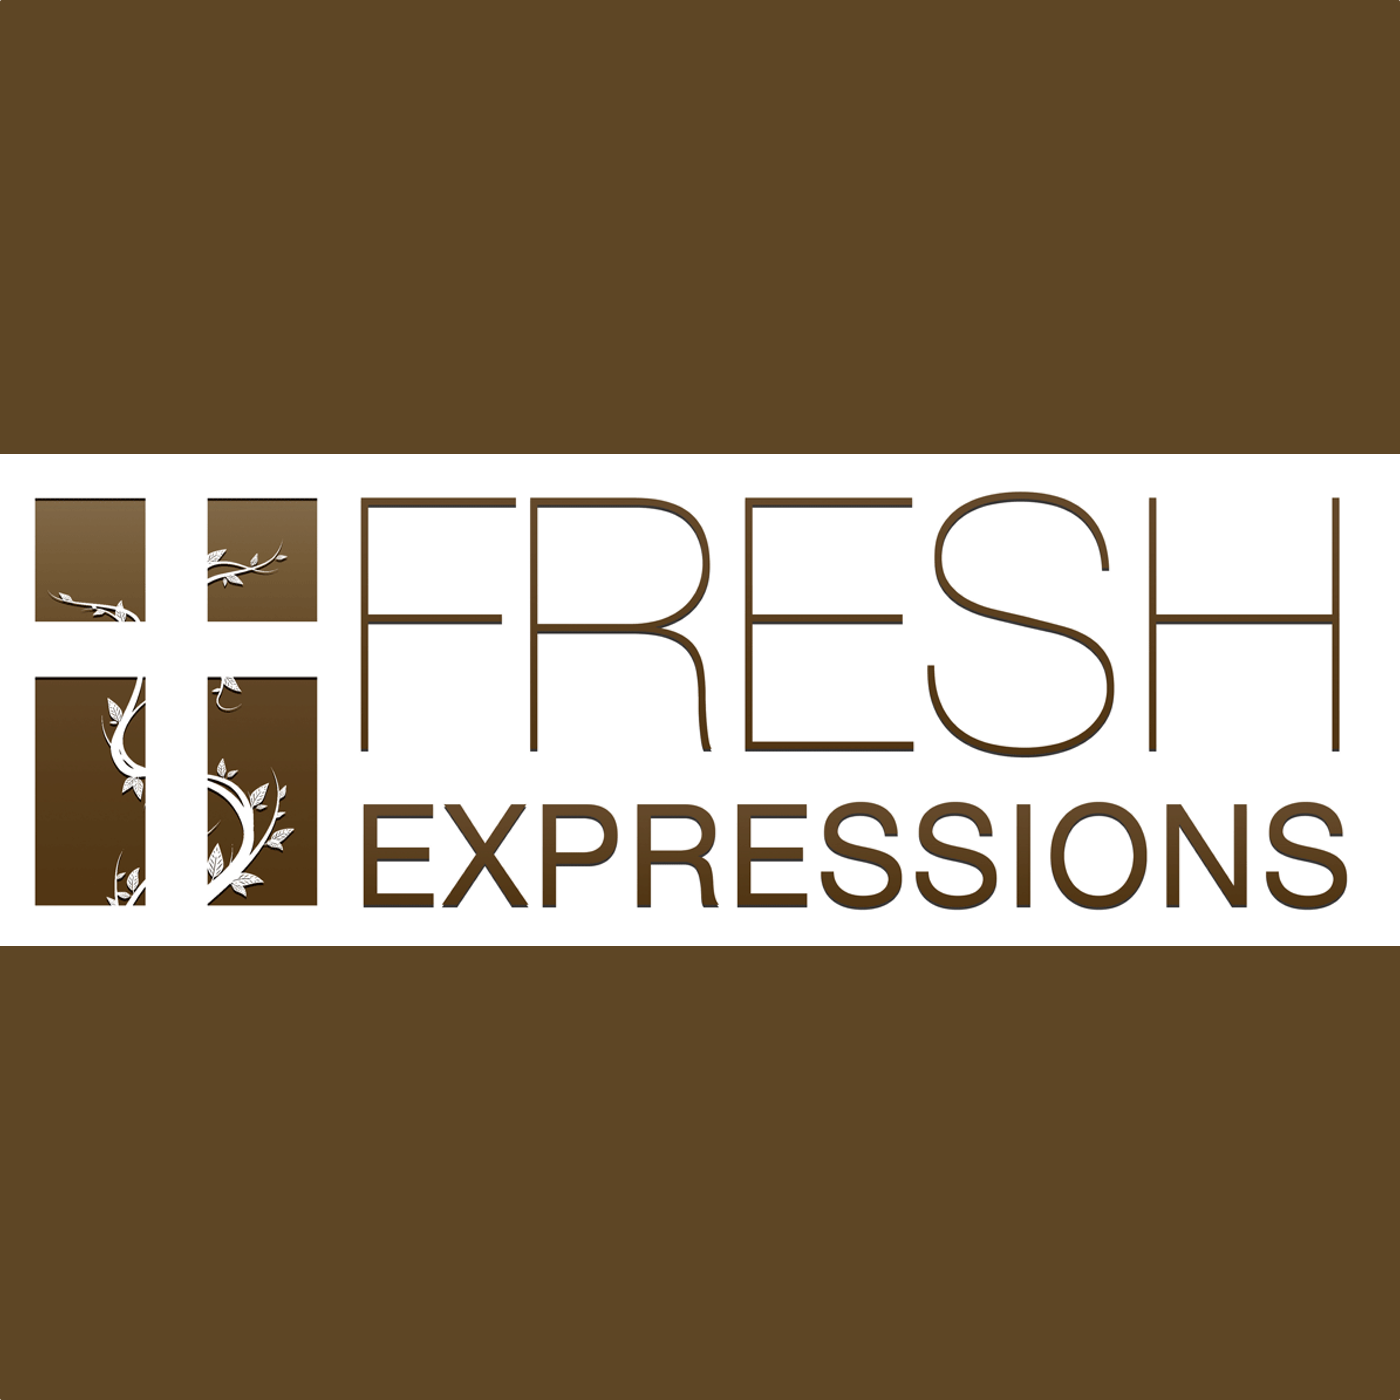 Fresh Expressions